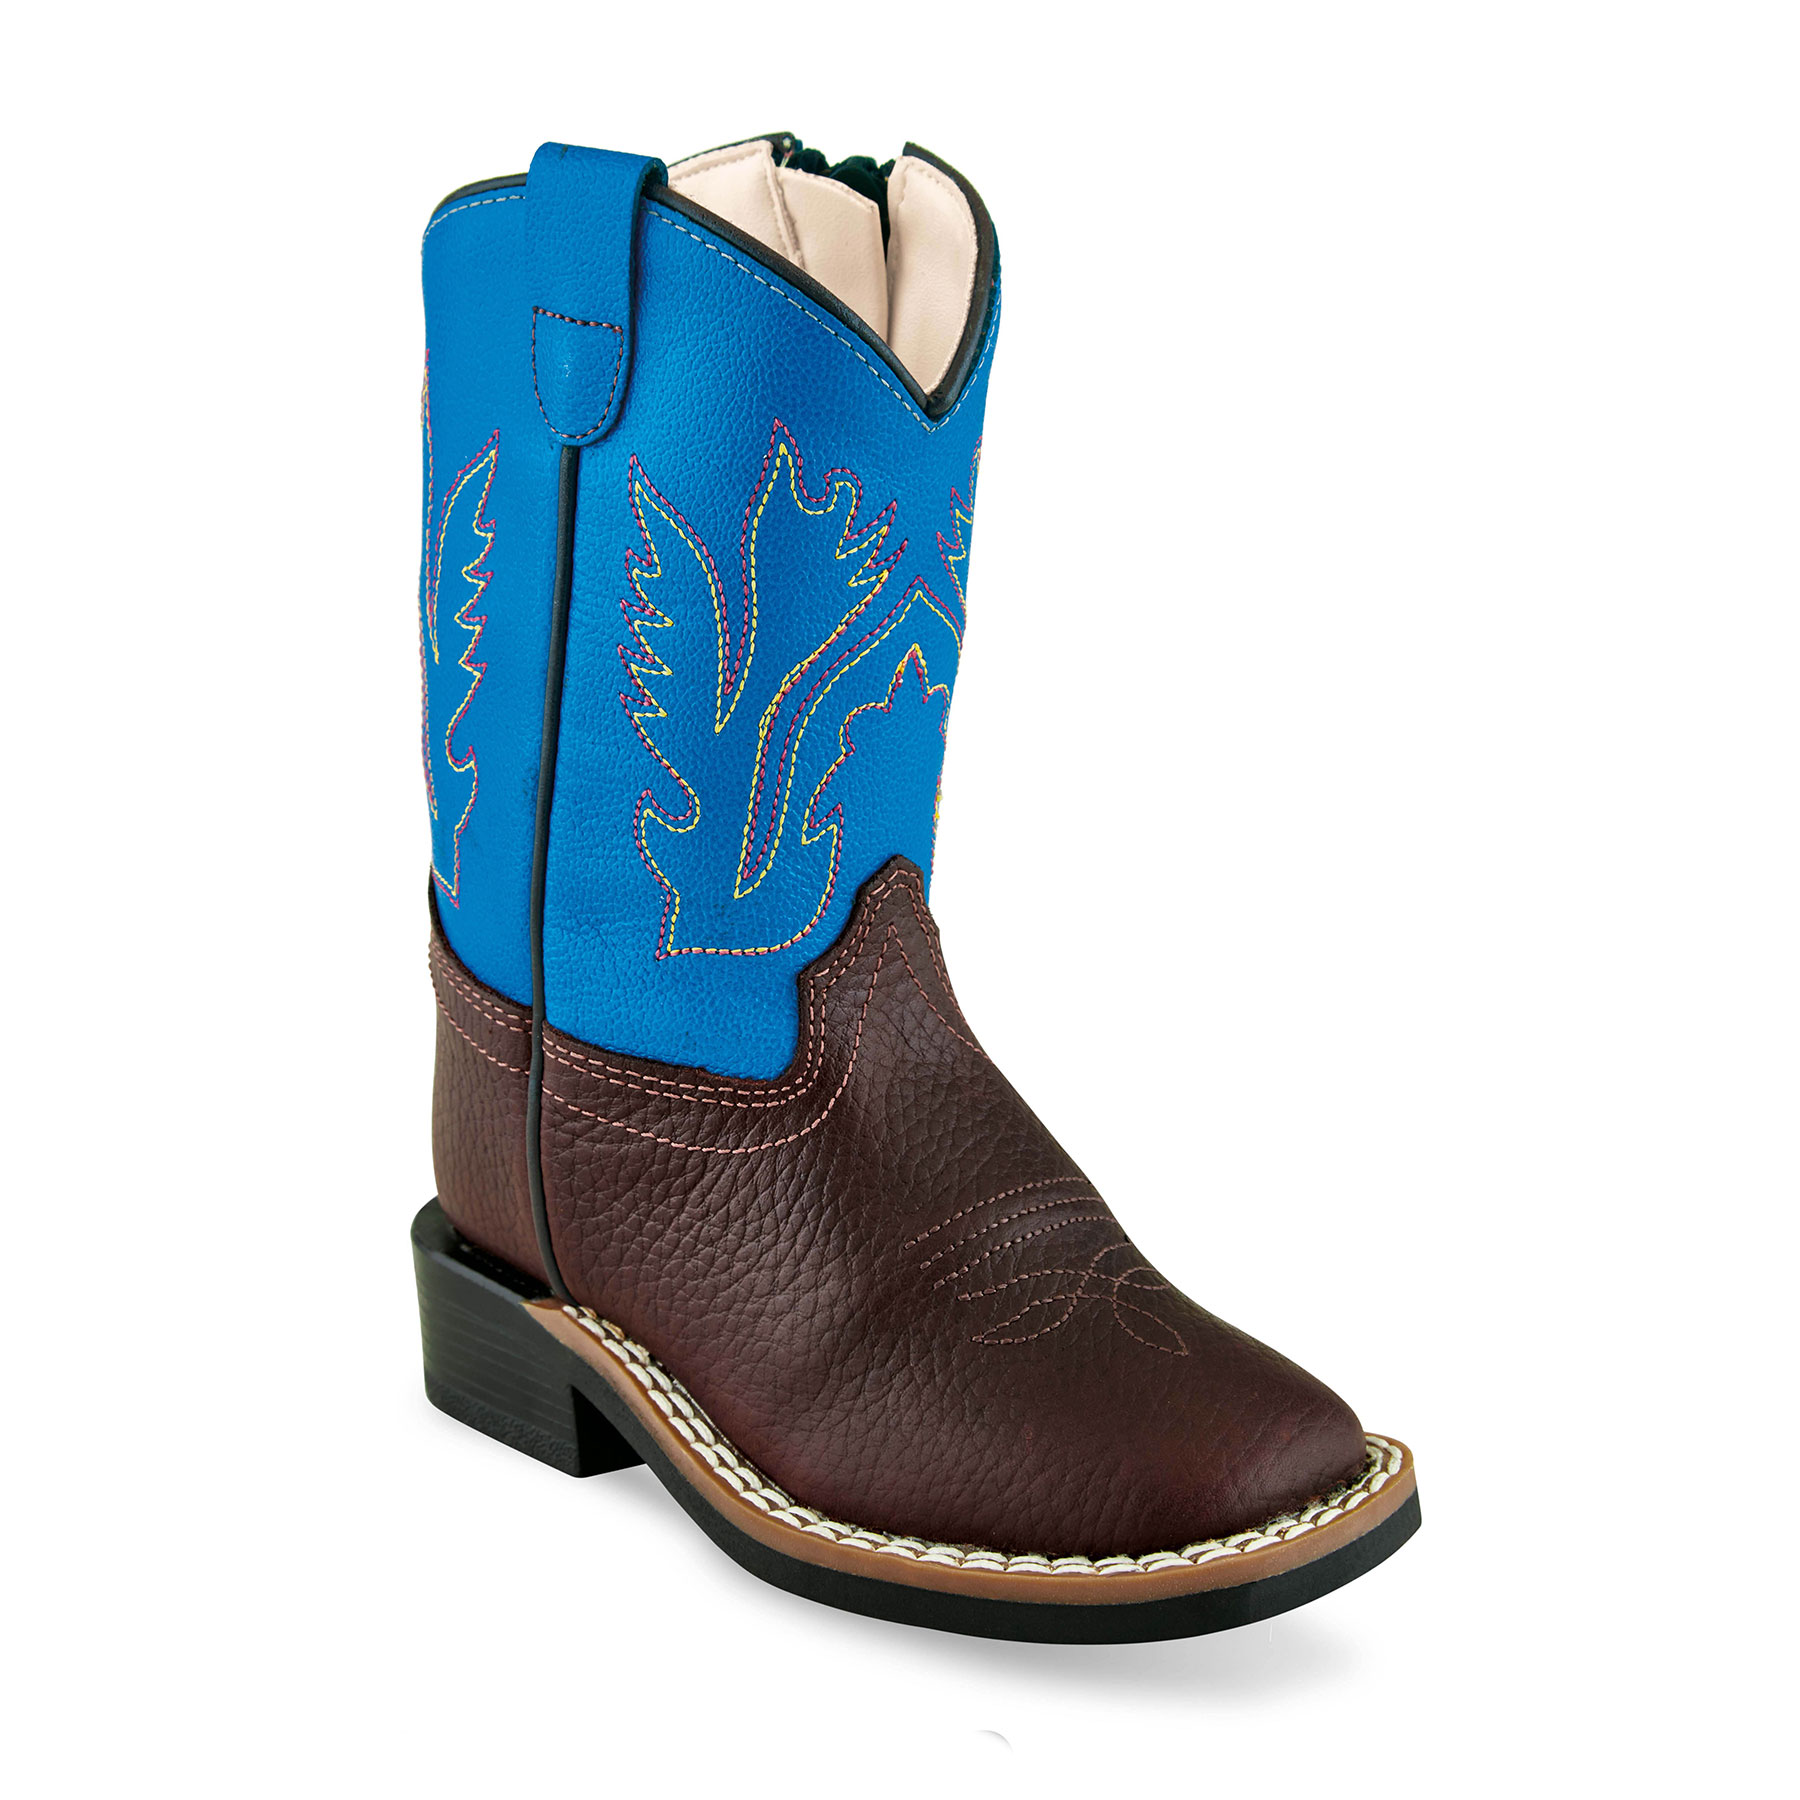 Pungo Ridge - Old West Toddler's Square Toe Boots - Rust/Blue, Toddler ...